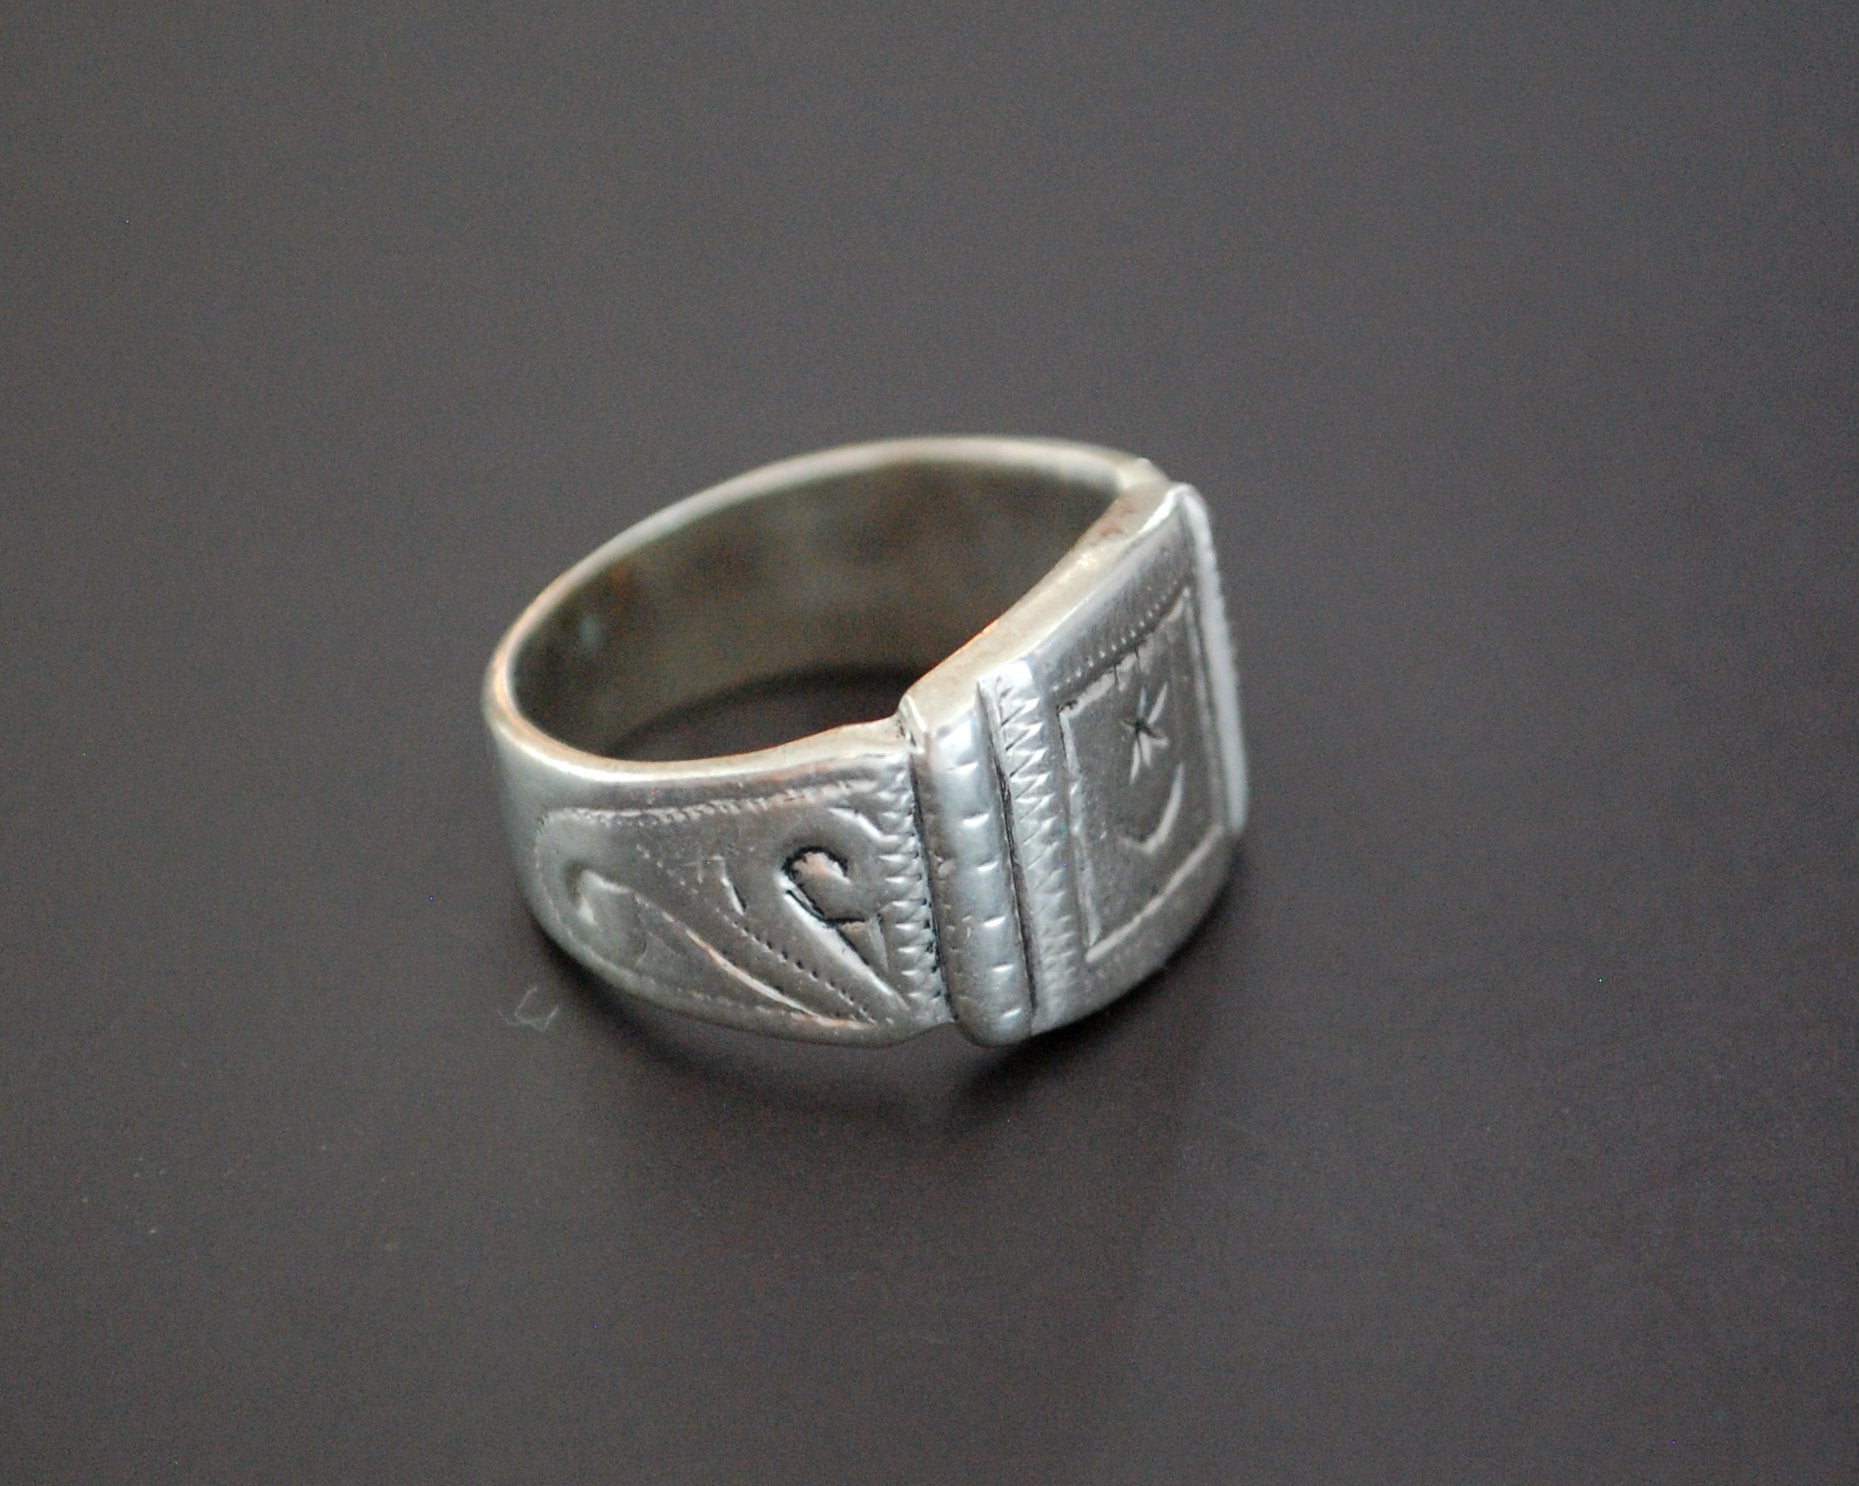 Berber Band Ring - Size 6.5